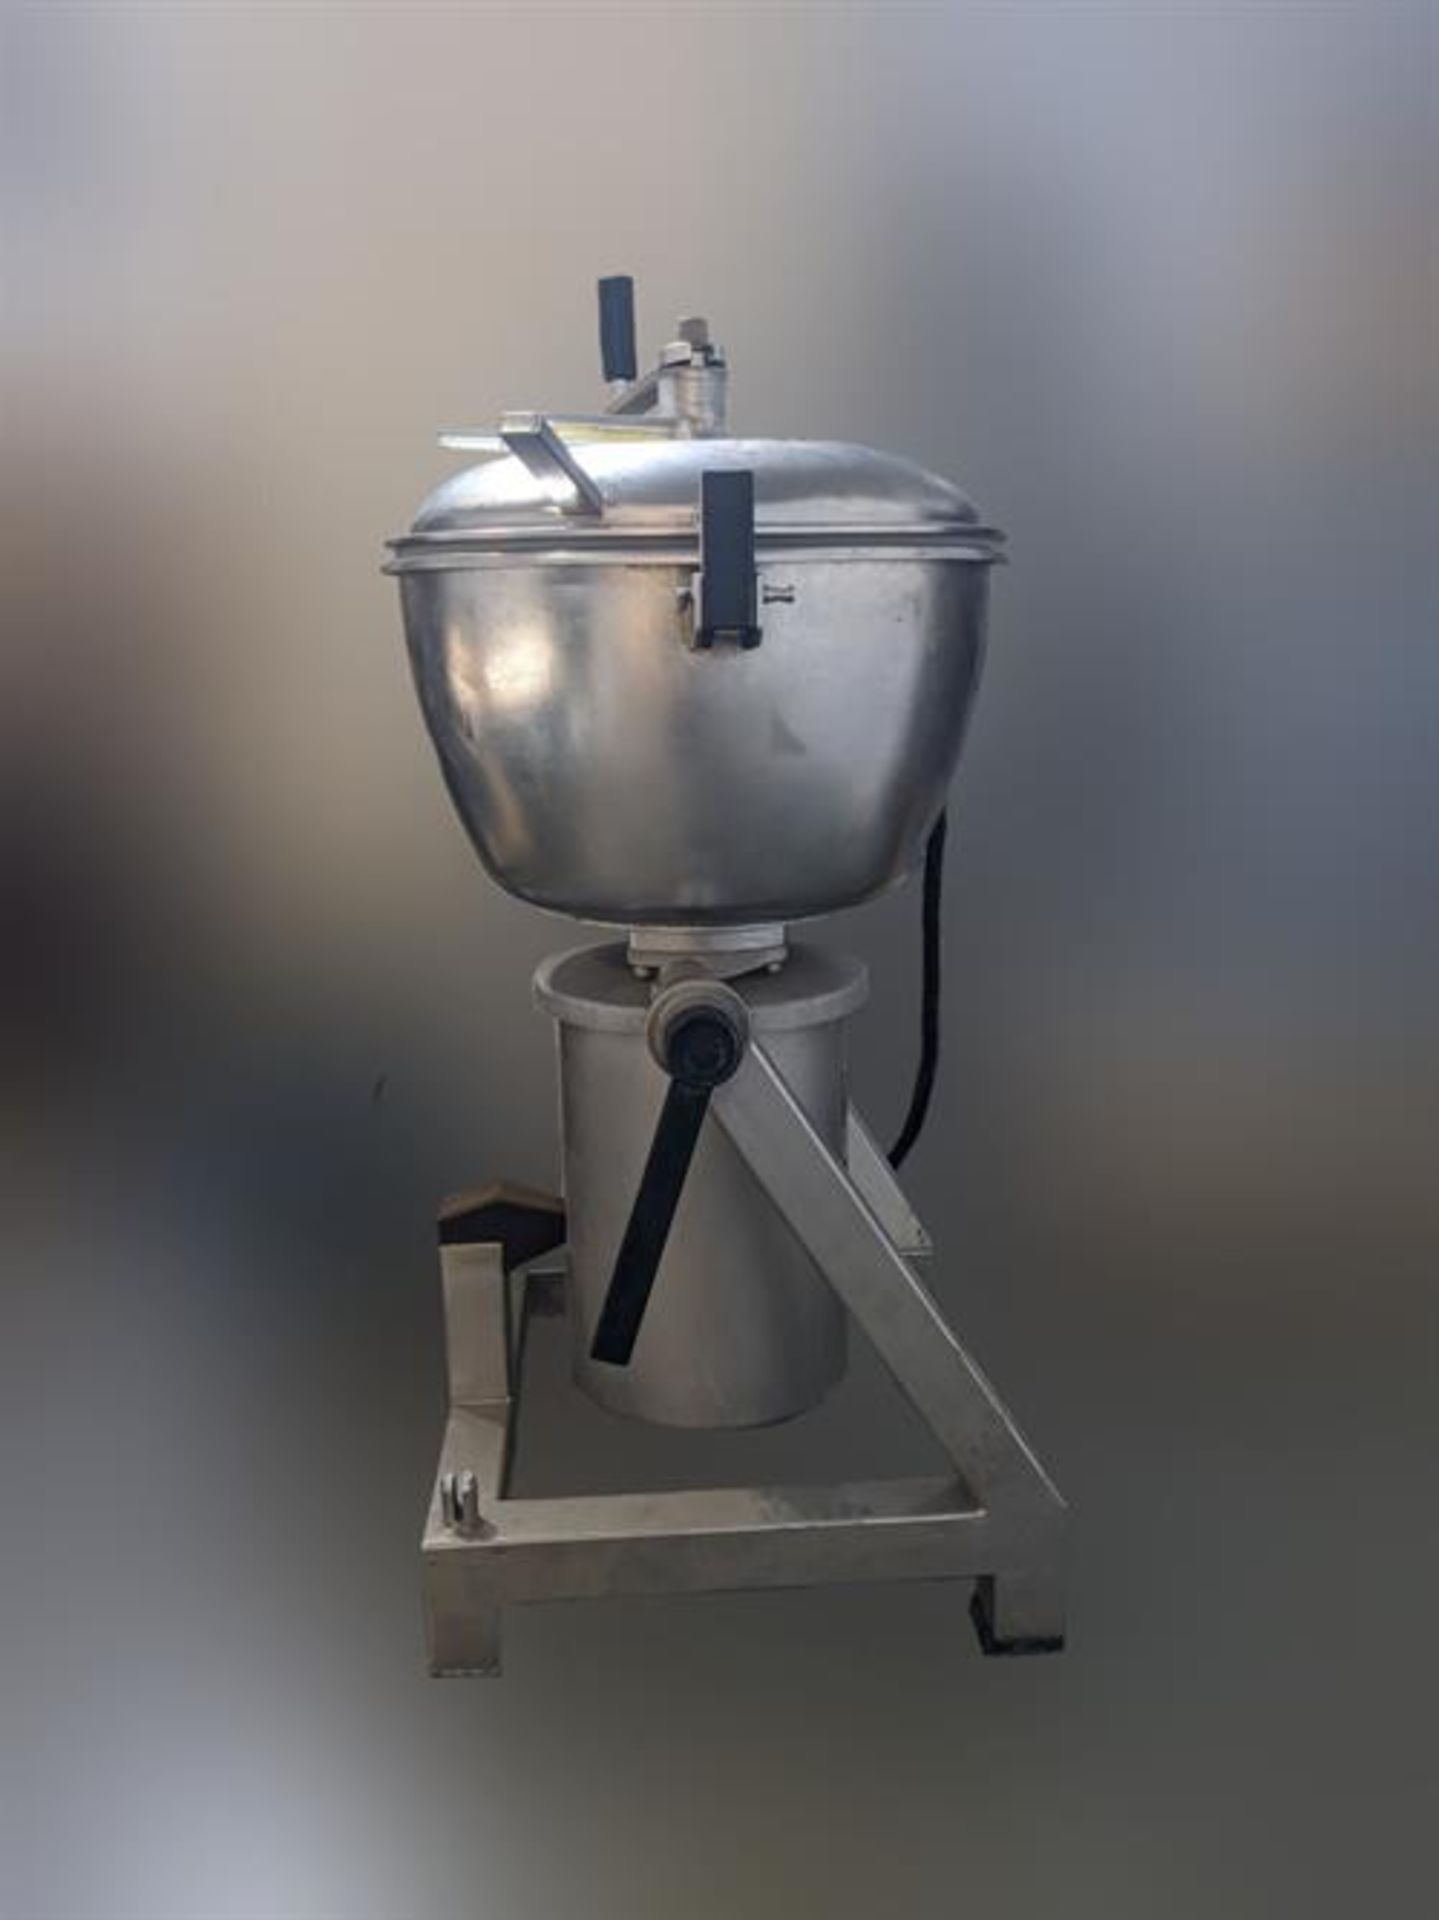 Stephan Model VCM44A Cutter Mixer - Model VCM44A - Serial number 716.097.04 - 44 liter capacity - - Image 7 of 9